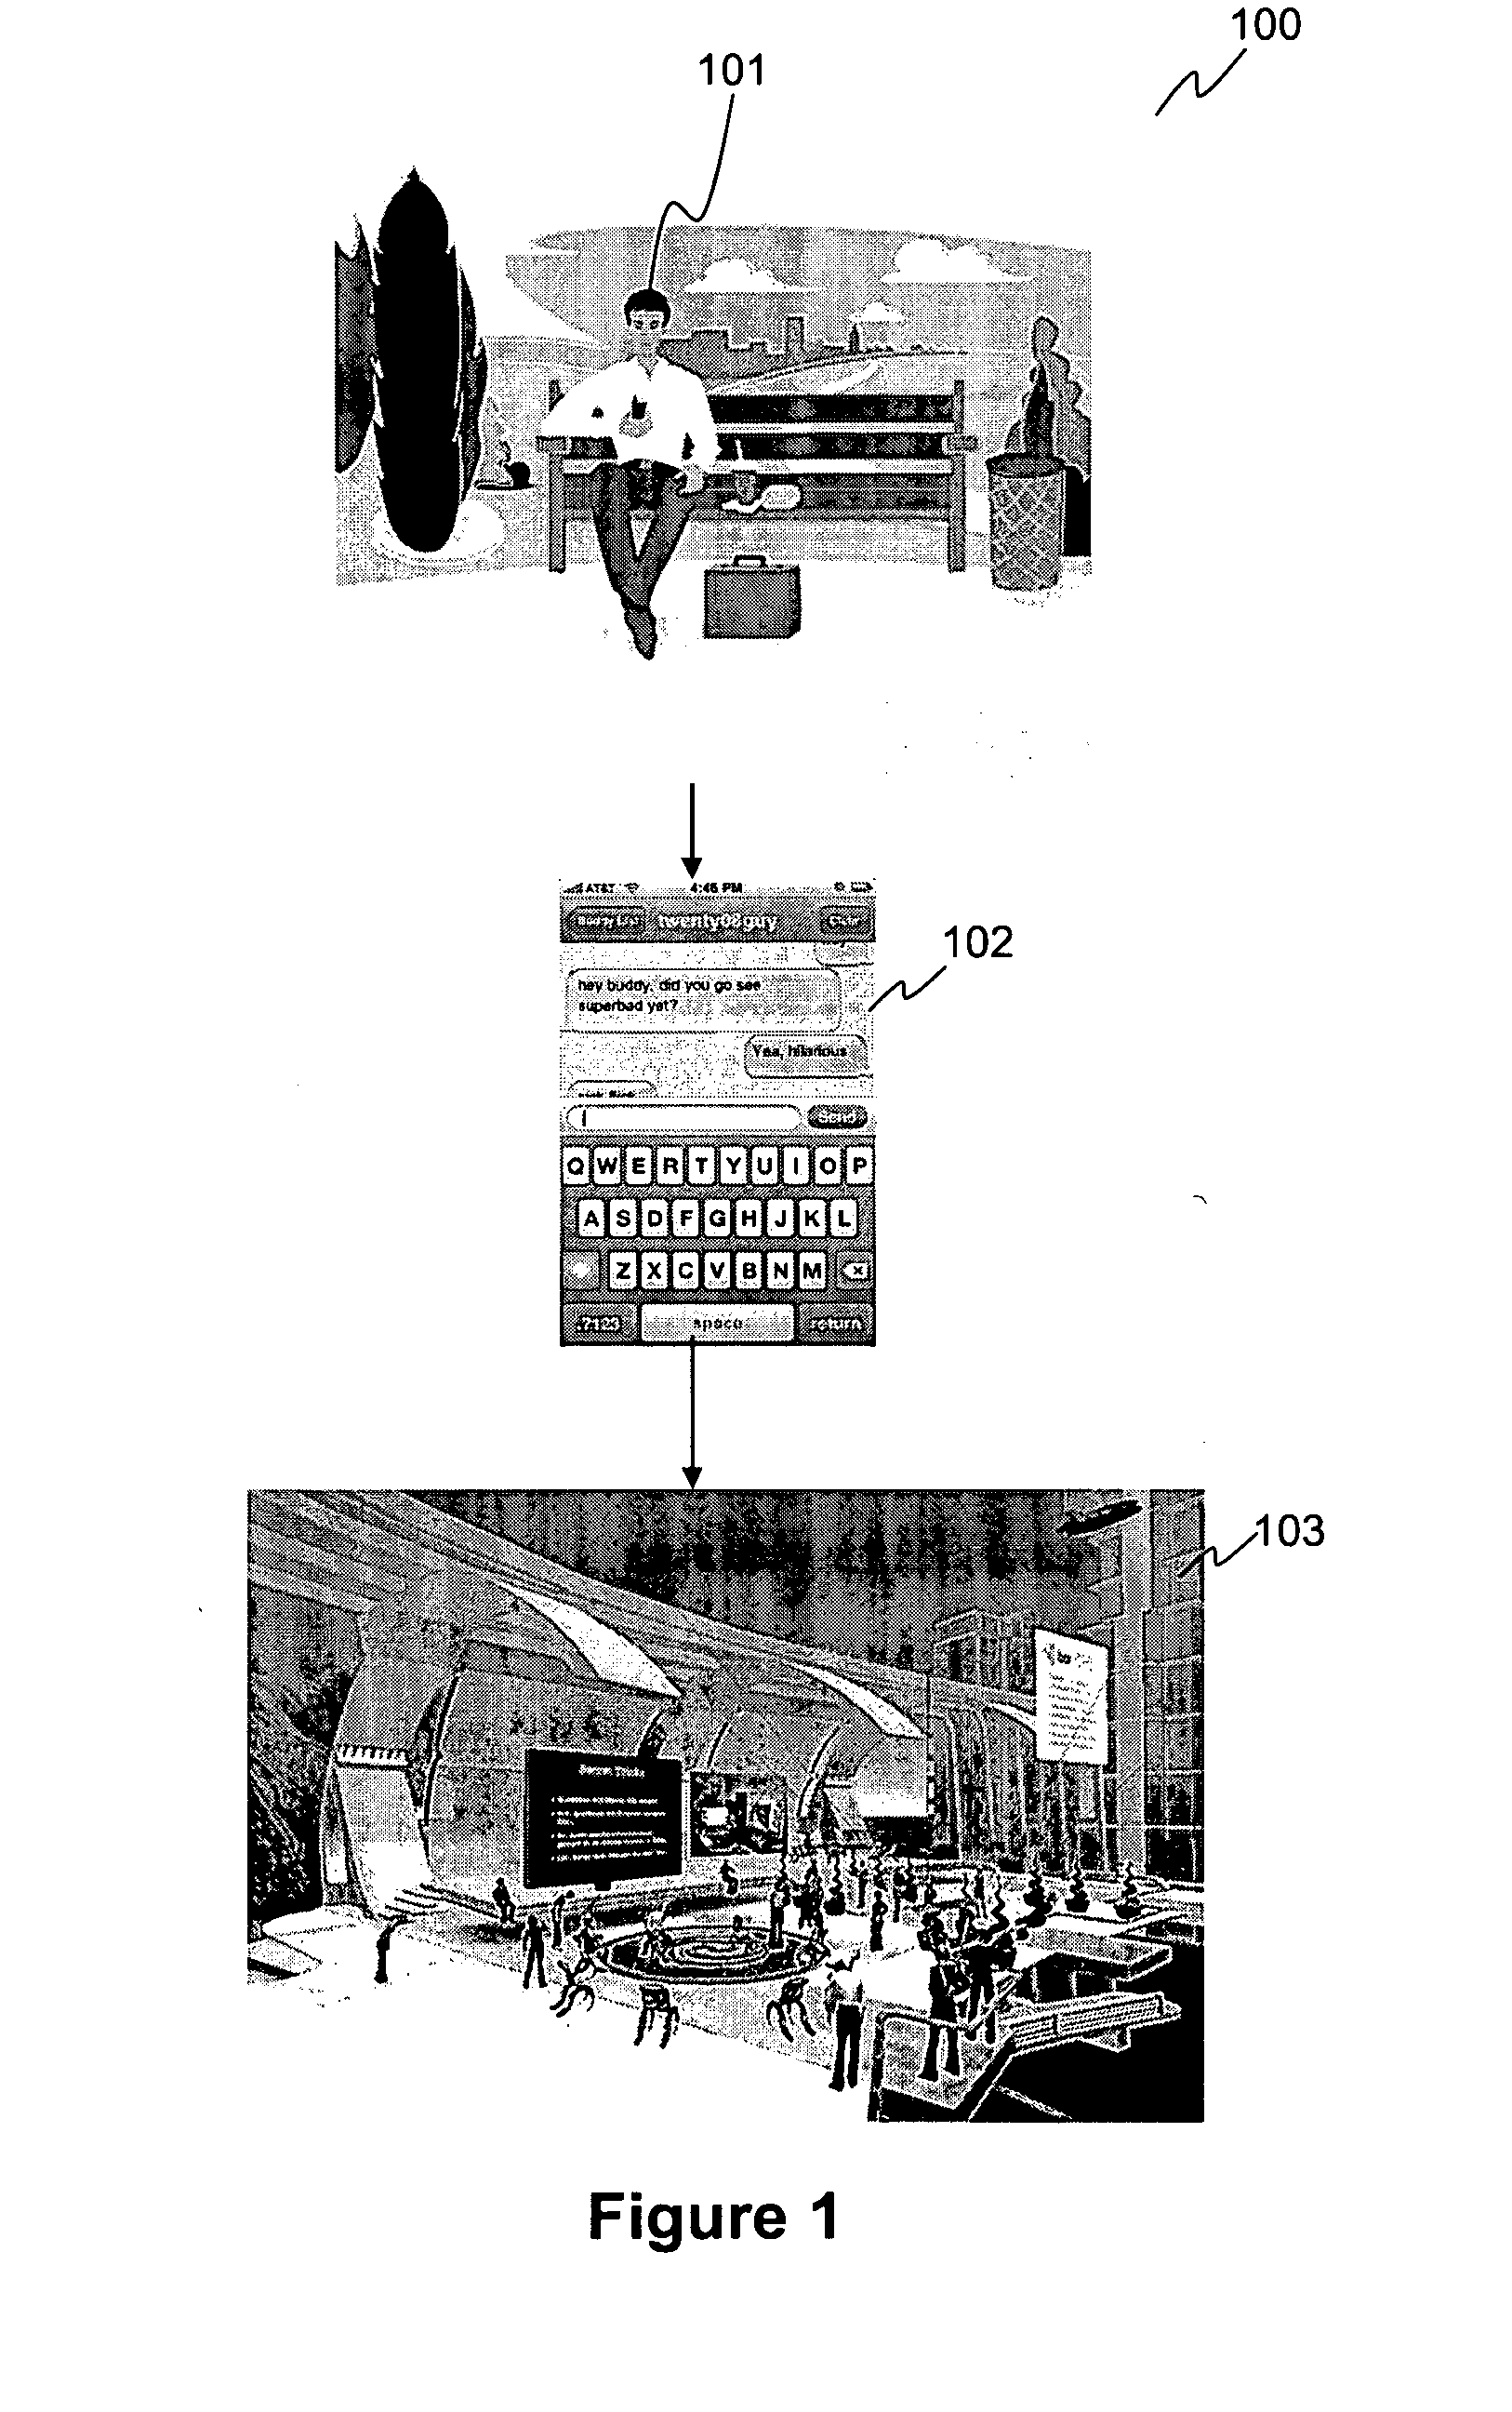 System and method for automatically controlling avatar actions using mobile sensors